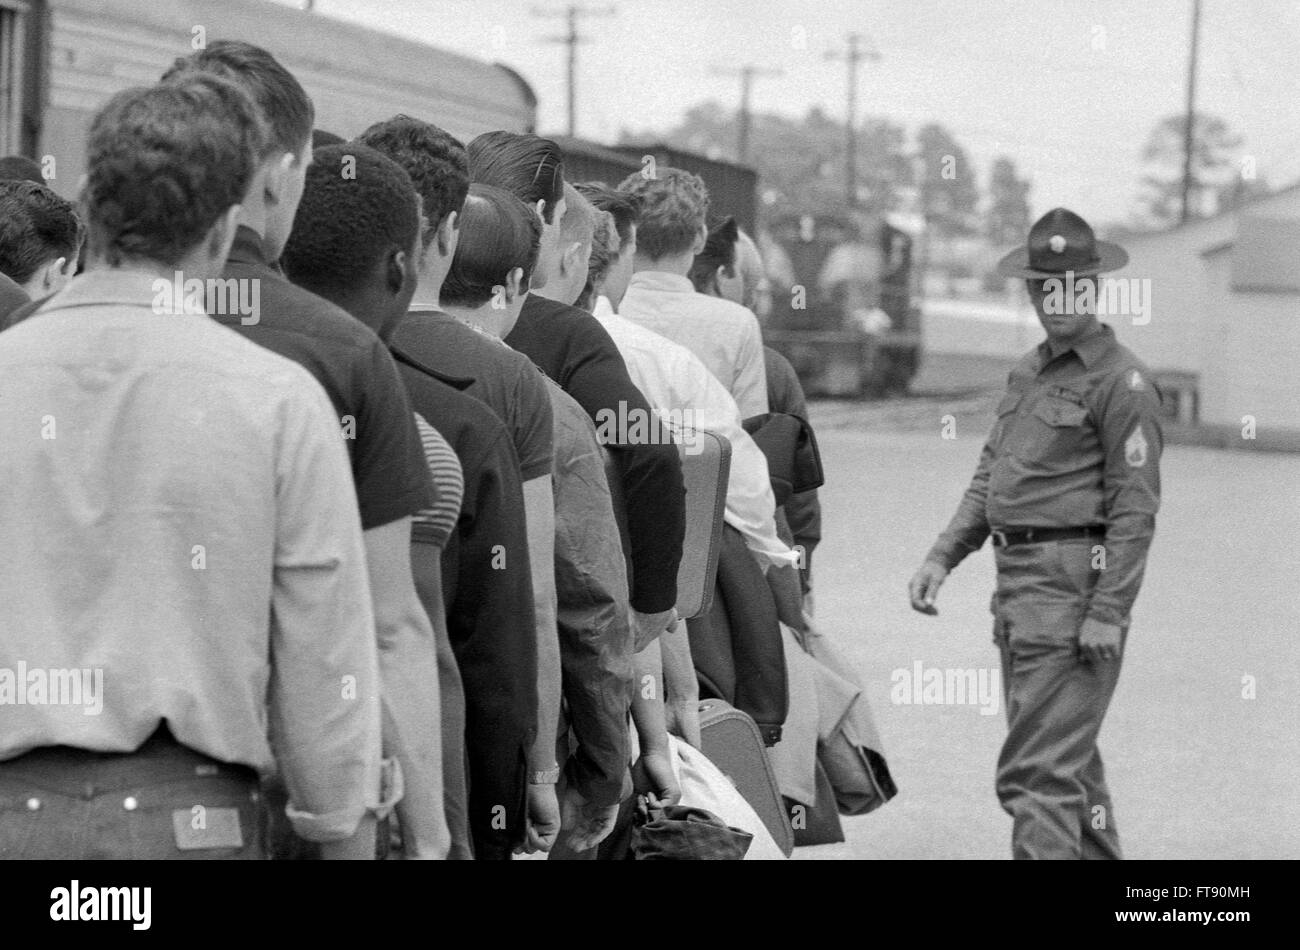 Vietnam Draft. Young men who have been drafted wait in line to be processed into the U.S. Army at Fort Jackson, Columbia, South Carolina, May 1967. Stock Photo